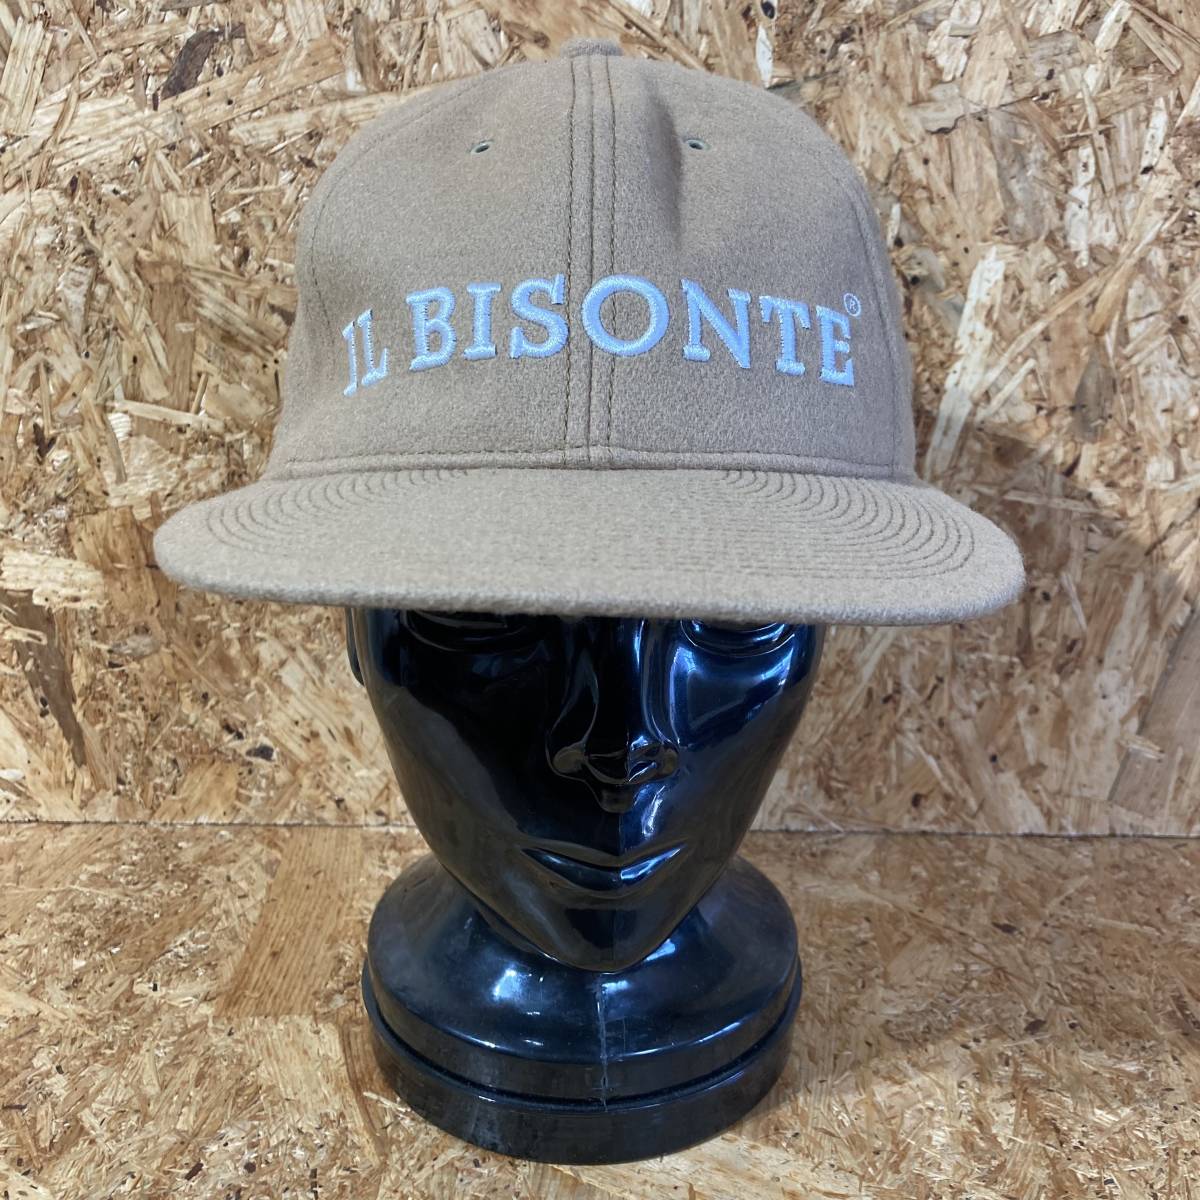 IL BISONTE POTEN PROFESSIONAL BASEBALL CAP collaboration special order limitation po ton wool leather Baseball cap hat 